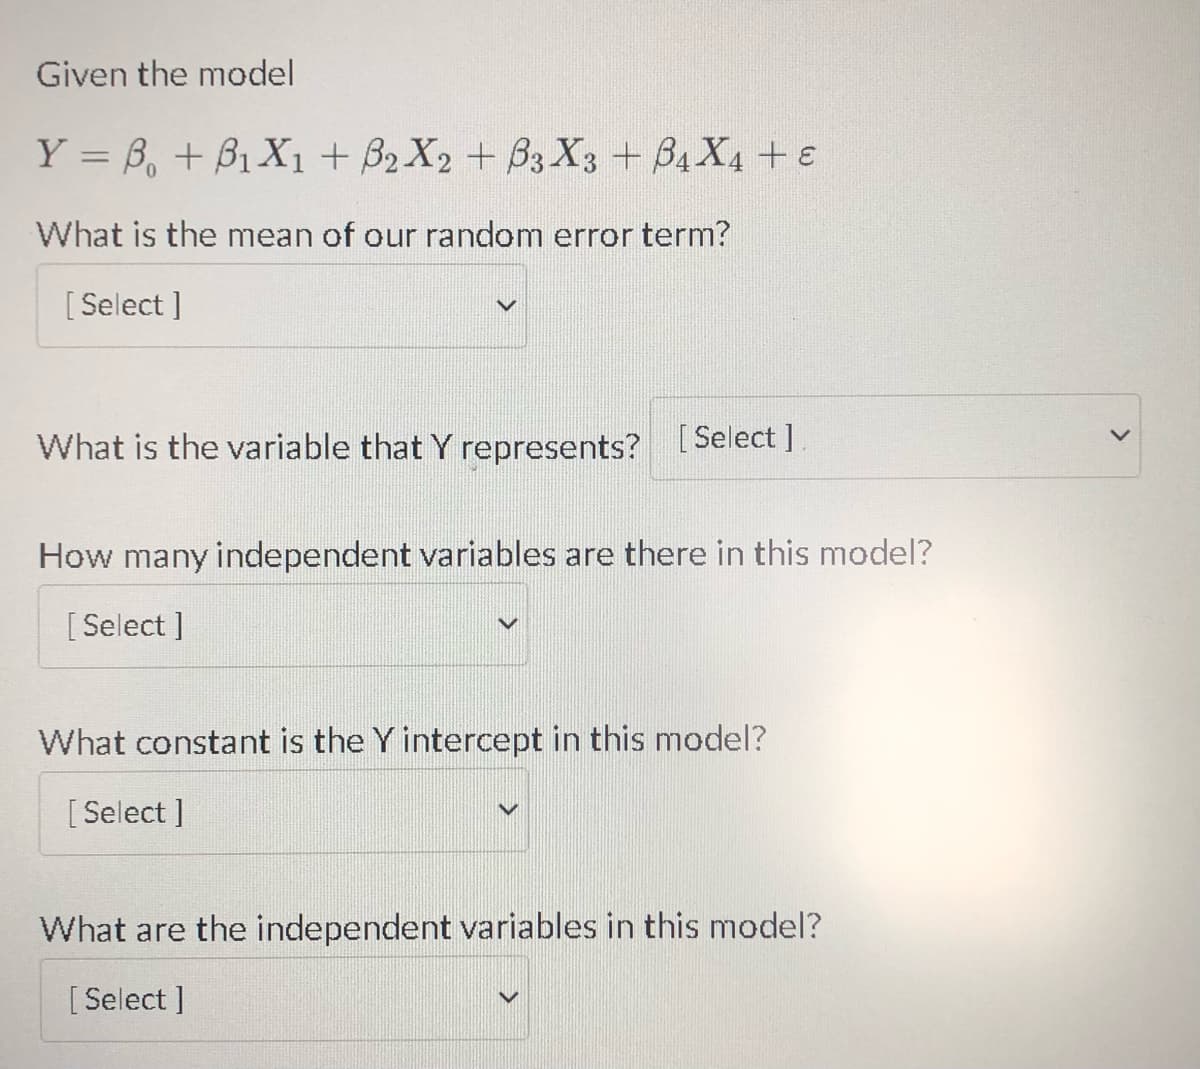 Given the model
Y = B + B₁X1 + B2X2 + B3X3 + B4X4 + E
What is the mean of our random error term?
[Select]
What is the variable that Y represents? [Select]
How many independent variables are there in this model?
[Select]
What constant is the Y intercept in this model?
[Select]
What are the independent variables in this model?
[Select]